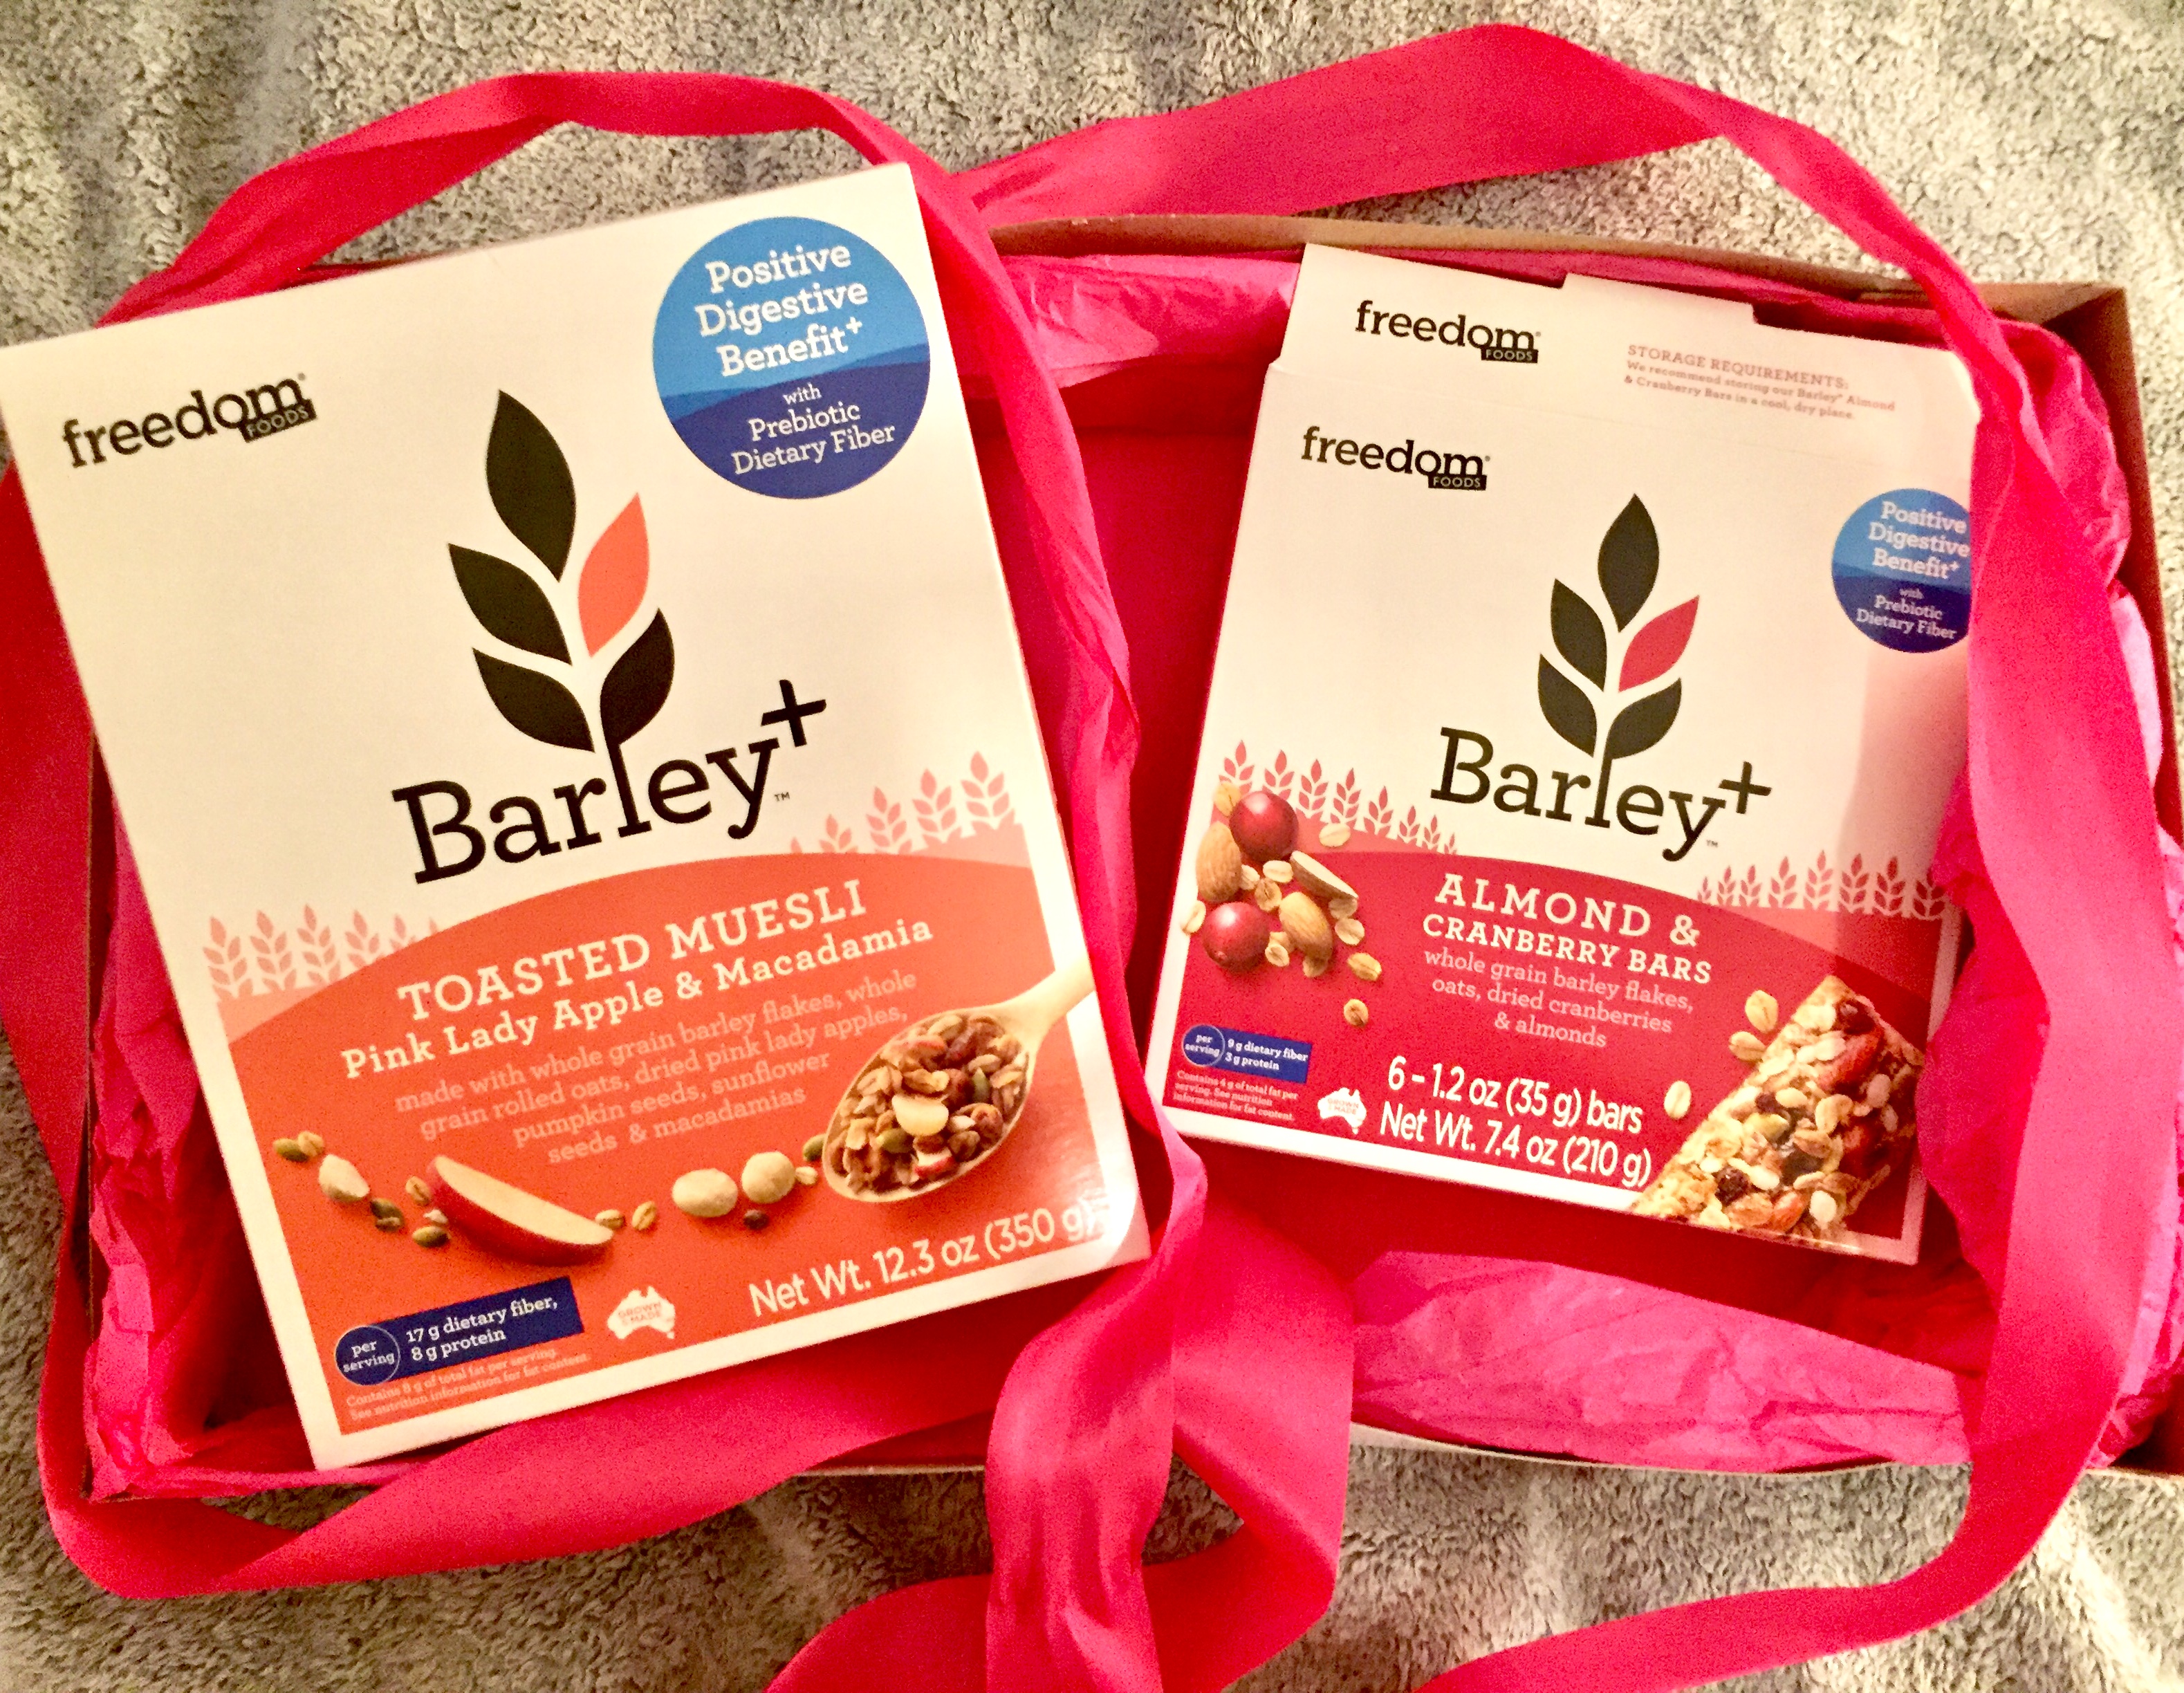 Travelling Dietitian Barley+ Pink Lady Apple and Macadamia Toasted Muesli from Freedom Foods USA